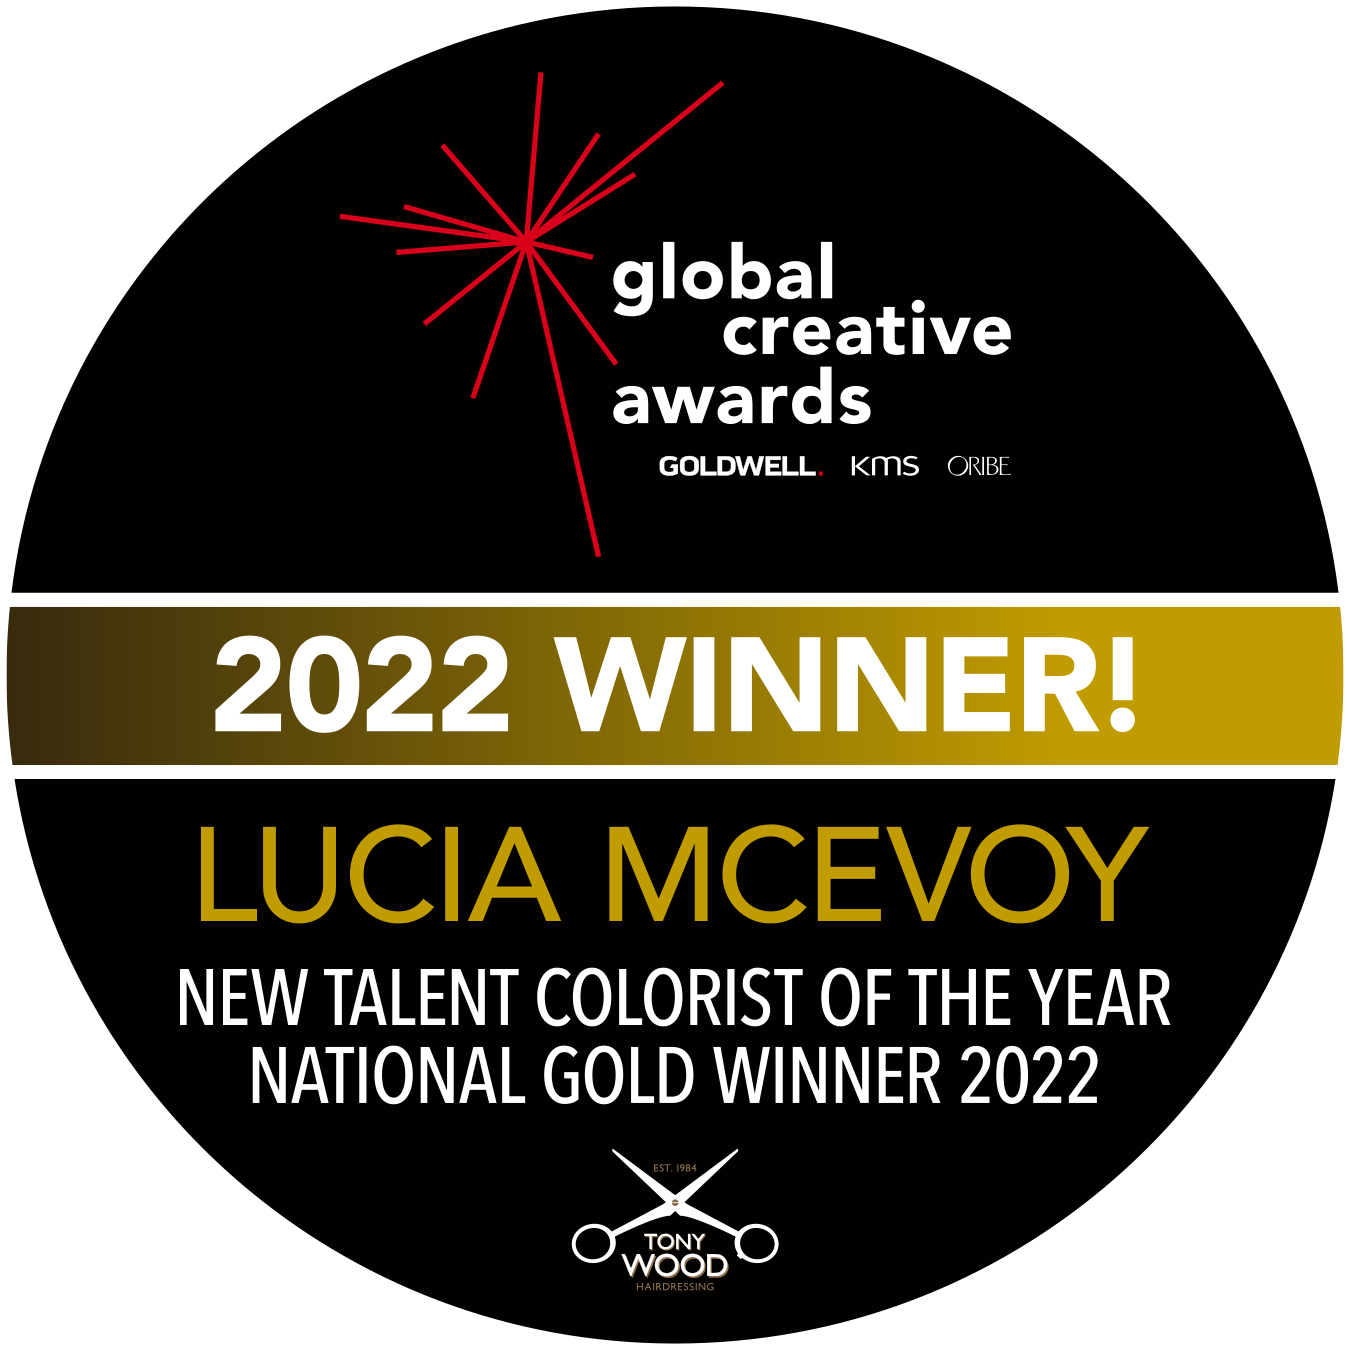 Lucia McEvoy at Tony Wood Hair in Portsmouth — National Gold Winner 2022 New Talent Colorist of the Year at the Global Creative Awards.png